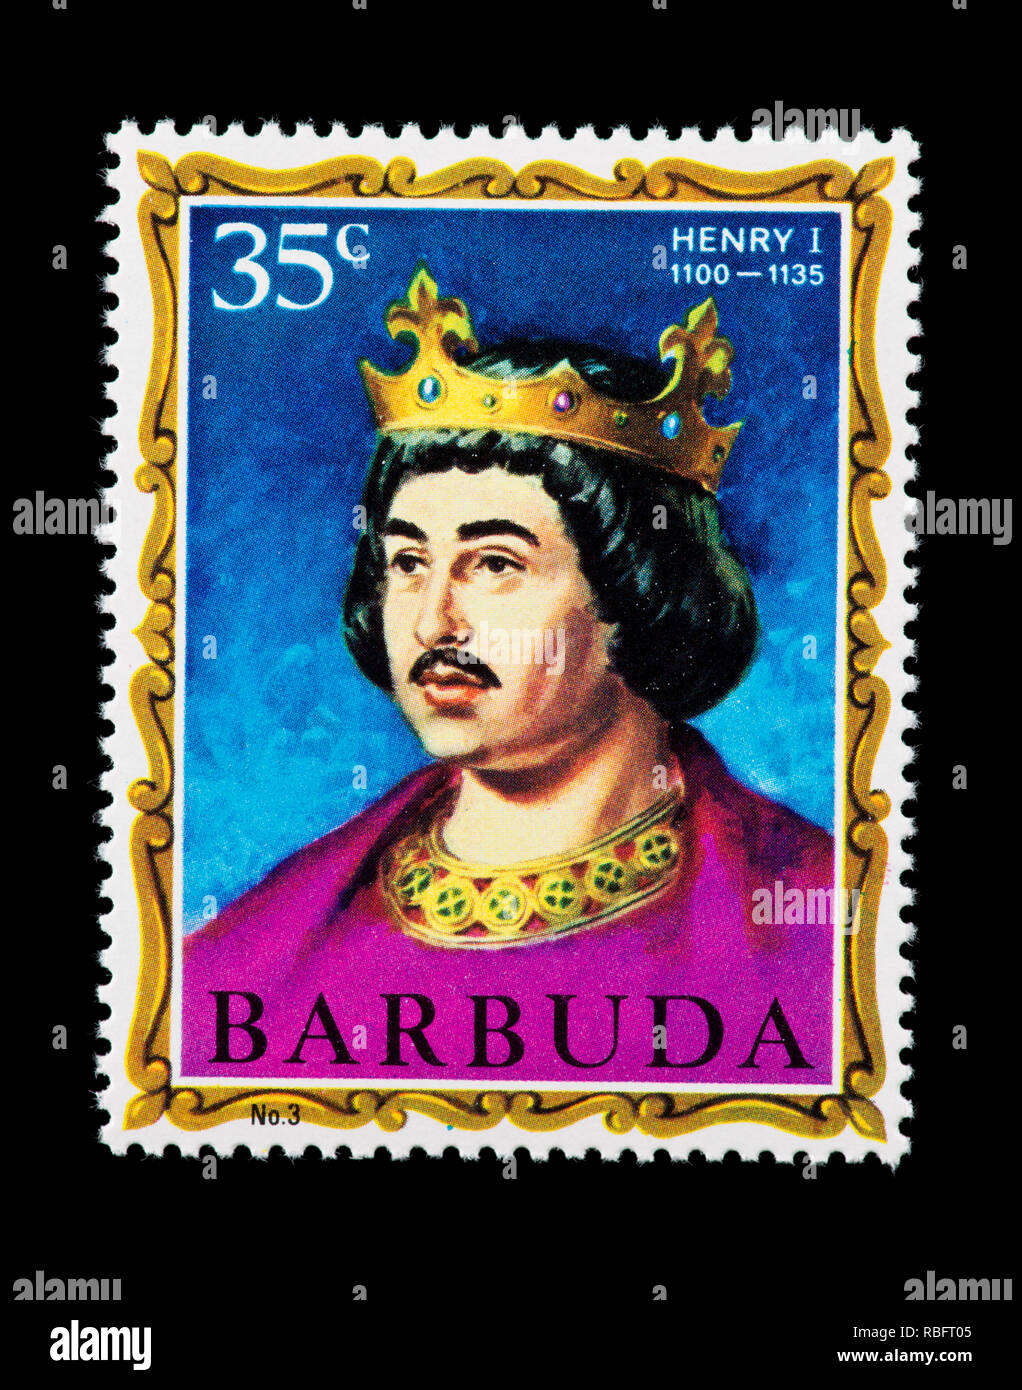 Postage stamp from Barbuda depicting Henry I, former king of England. Stock Photo